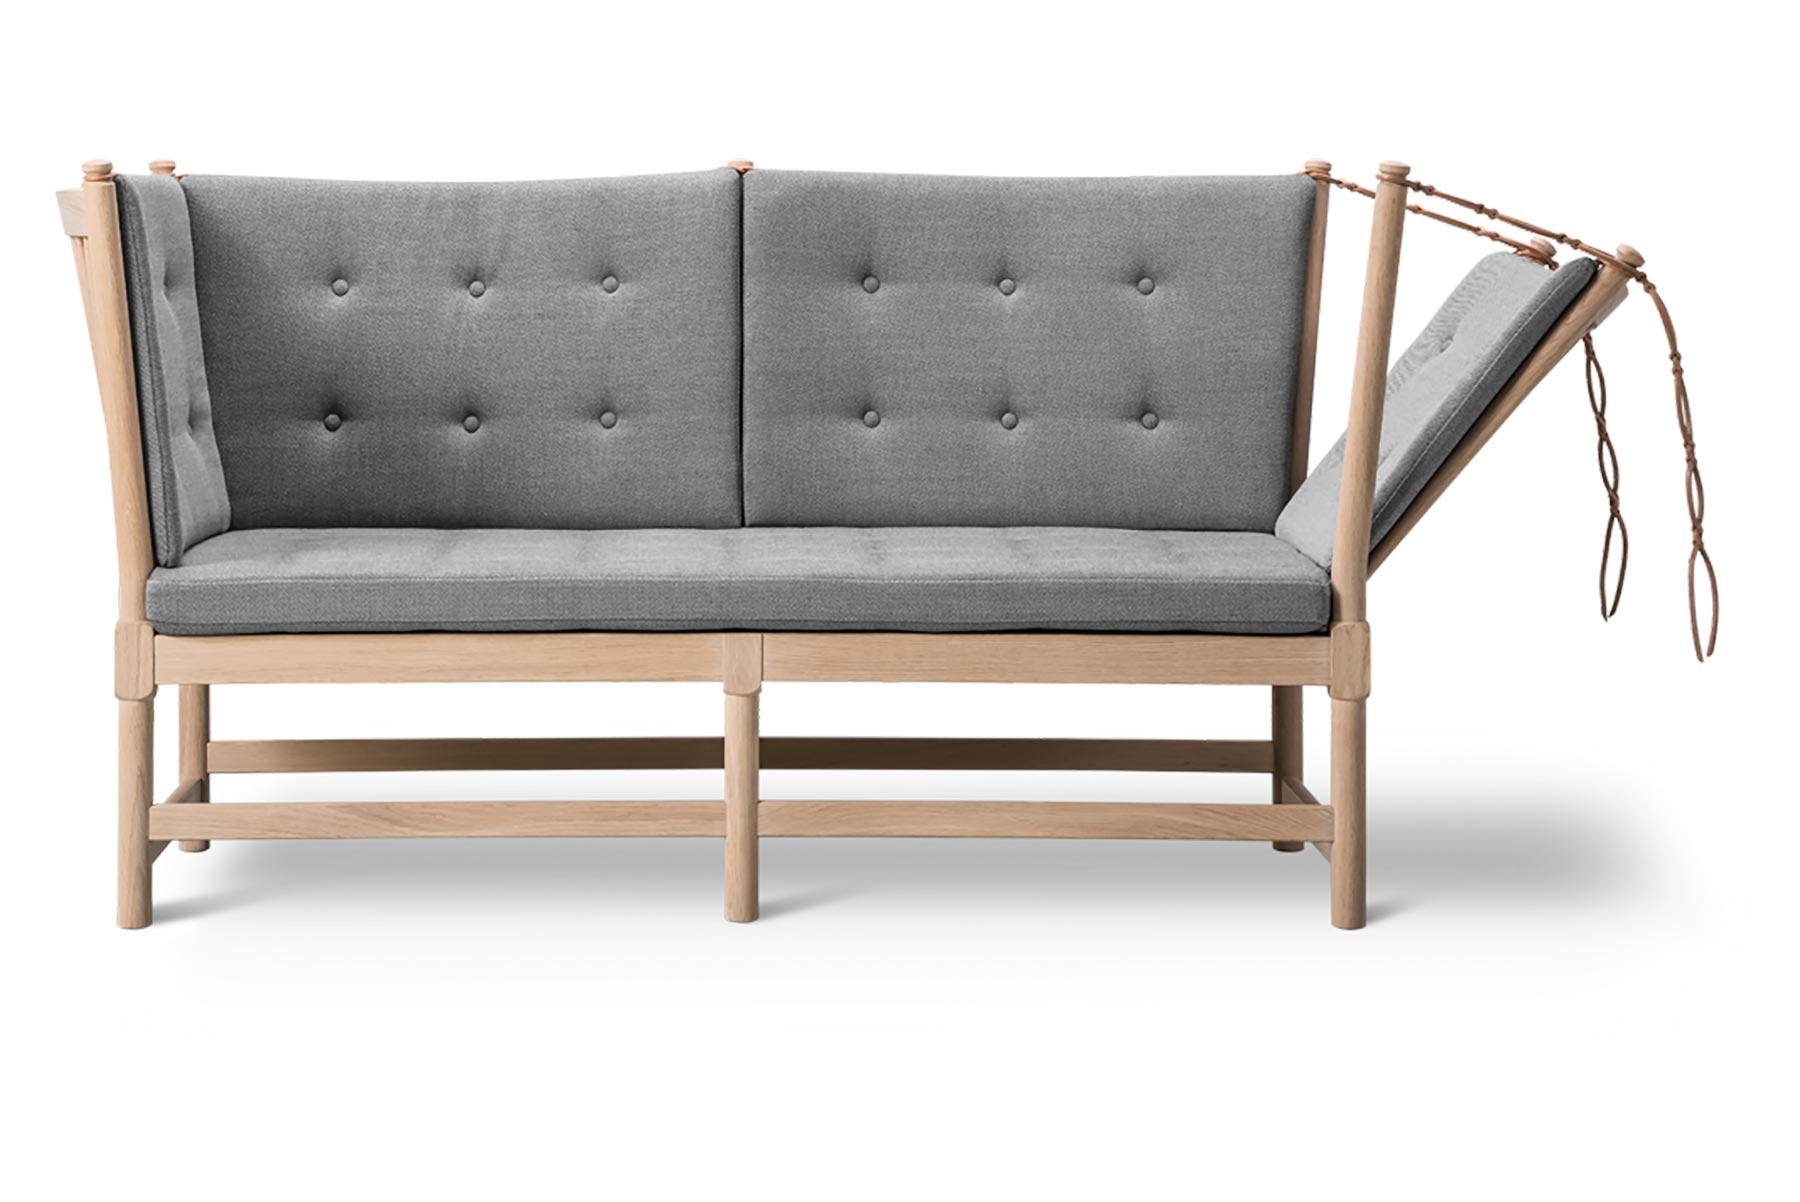 Mogensen designed the spoke back sofa in 1945 as a daybed and chaise lounge hybrid, with a hinged side. The exposed construction was too sophisticated for modest post-war culture and the sofa did not go into production until 1962.